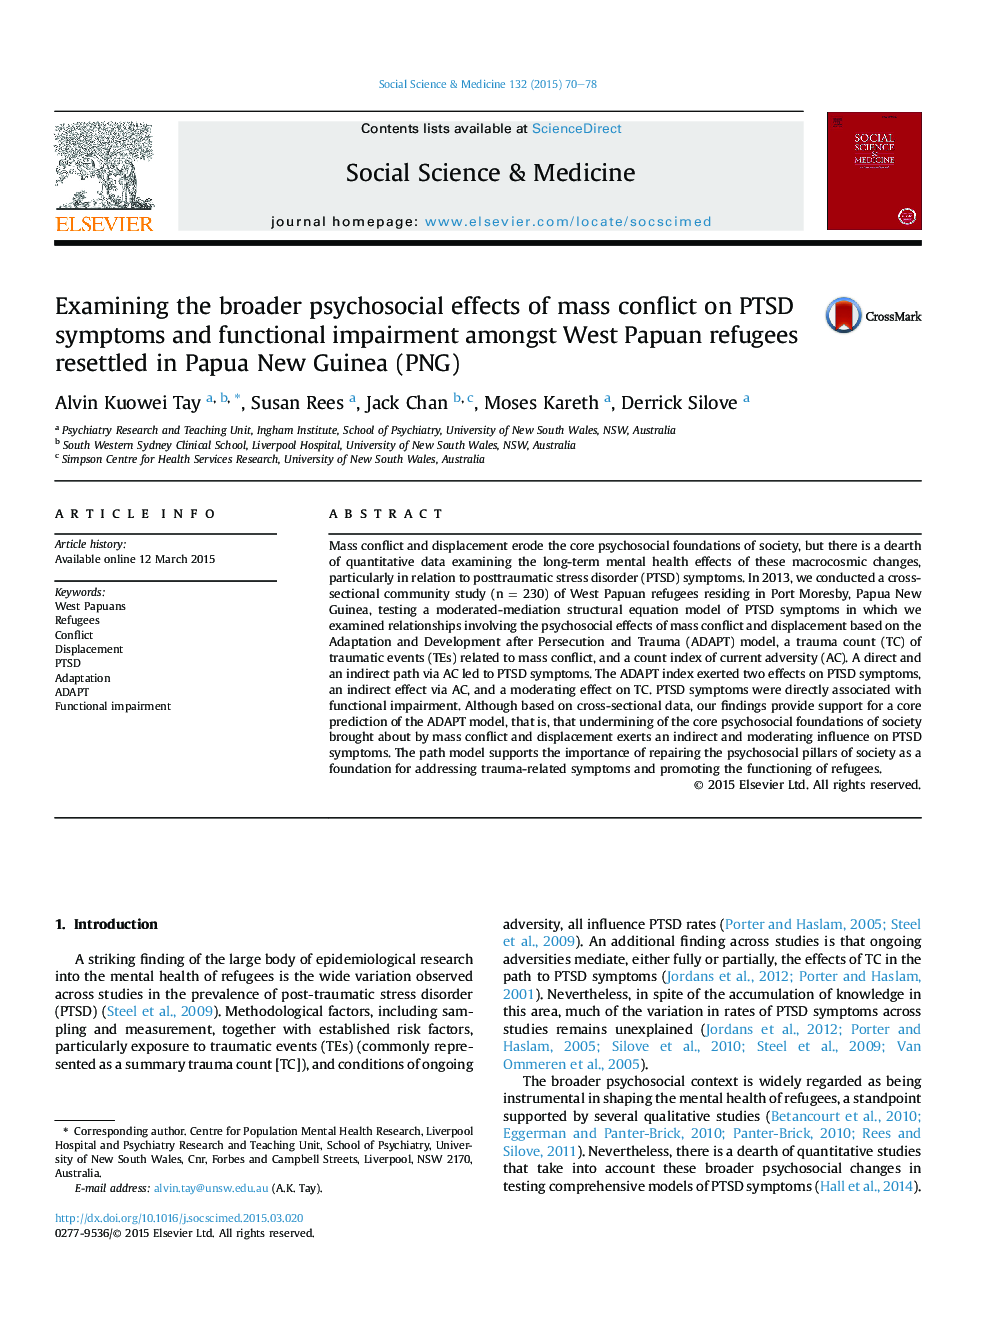 Examining the broader psychosocial effects of mass conflict on PTSD symptoms and functional impairment amongst West Papuan refugees resettled in Papua New Guinea (PNG)